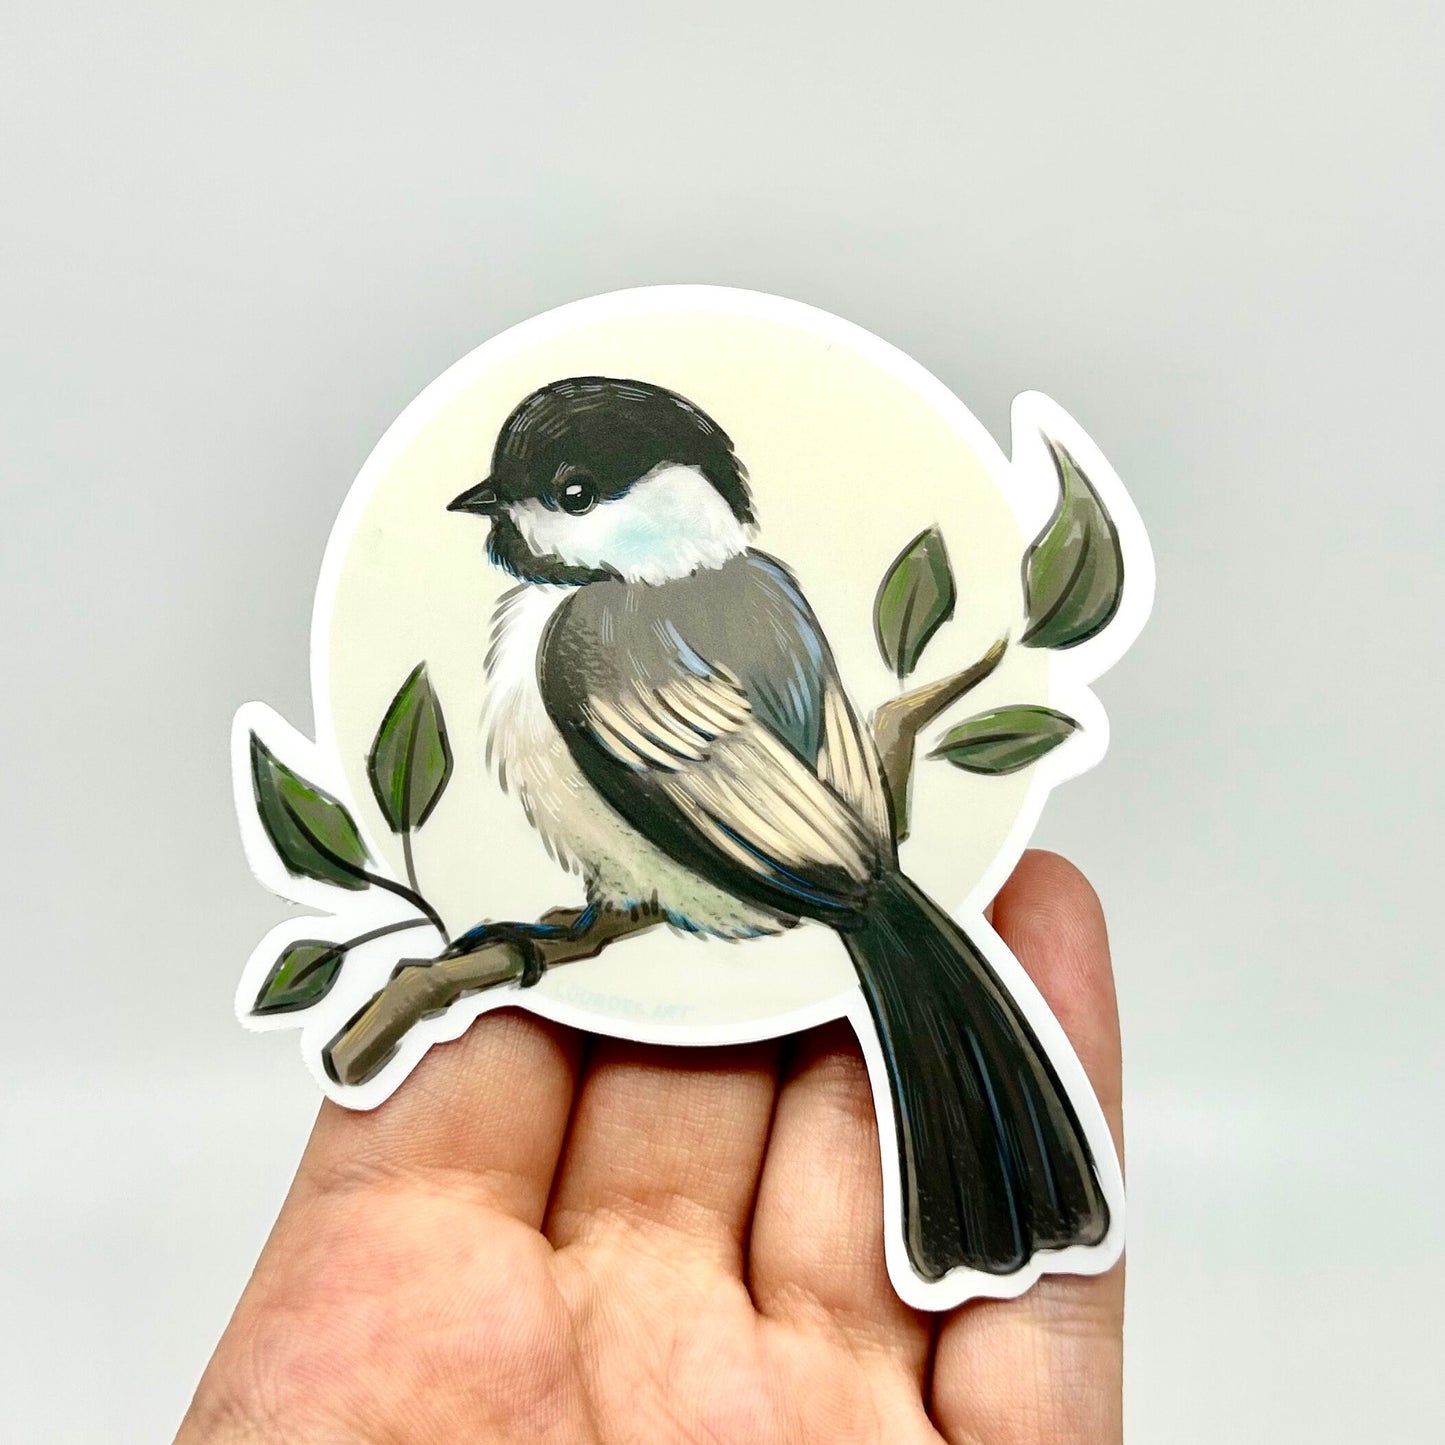 Cute Northeastern Chickadee Vinyl Sticker - Perfect for Ornithologists, Birdwatchers, and Sticker Collectors